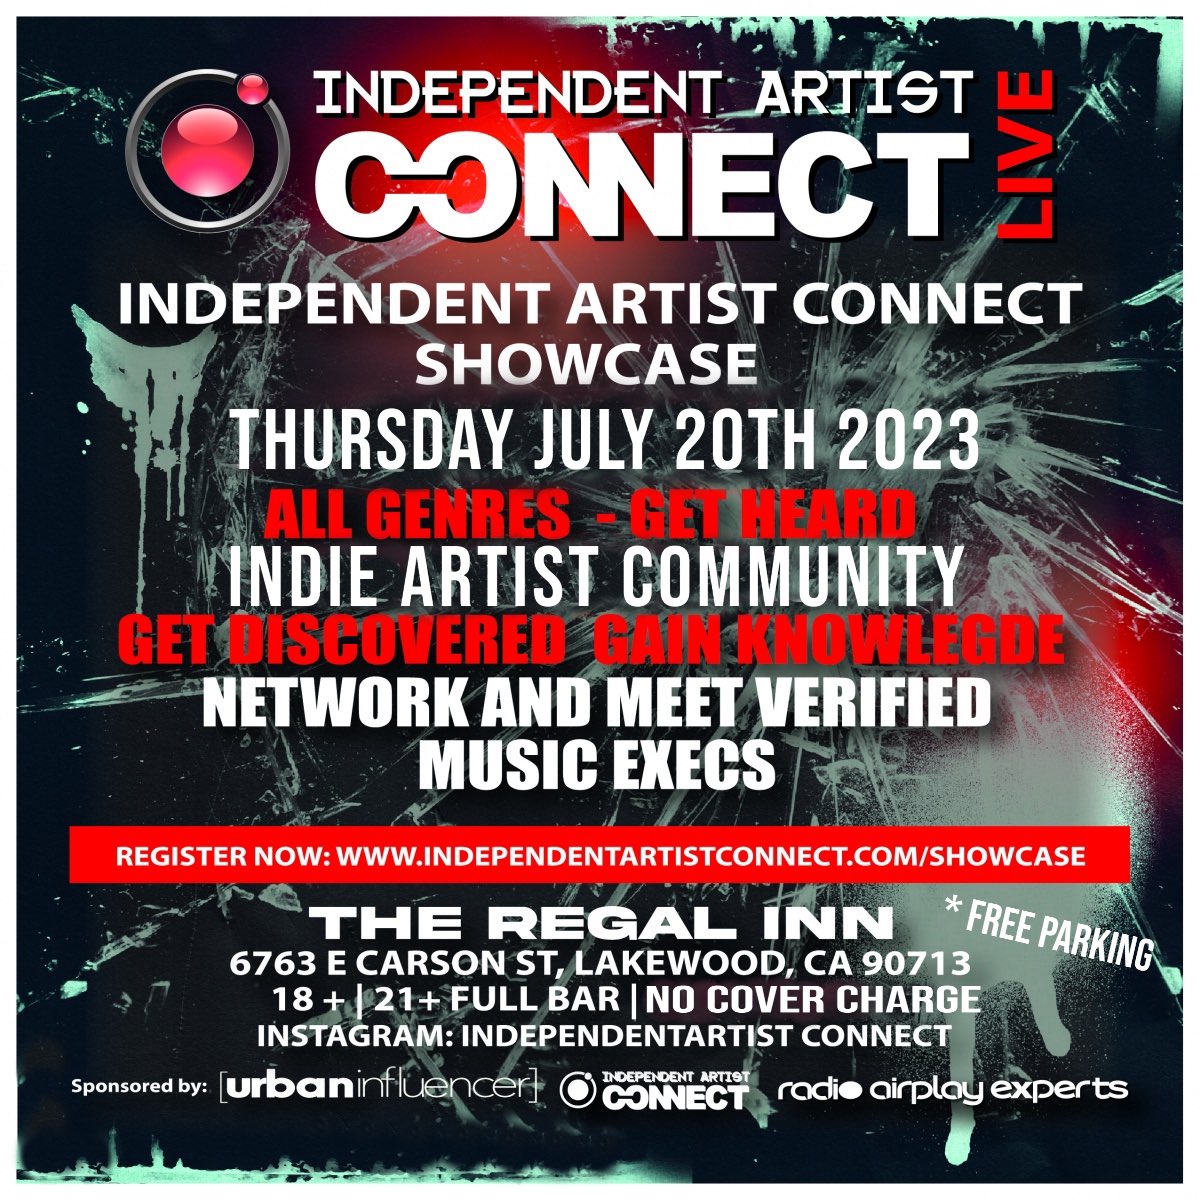 Be here … @artistconnect_1 no cover charge #musicians #singersongwriter #longbeach #lakewood #livemusic 7/20/23